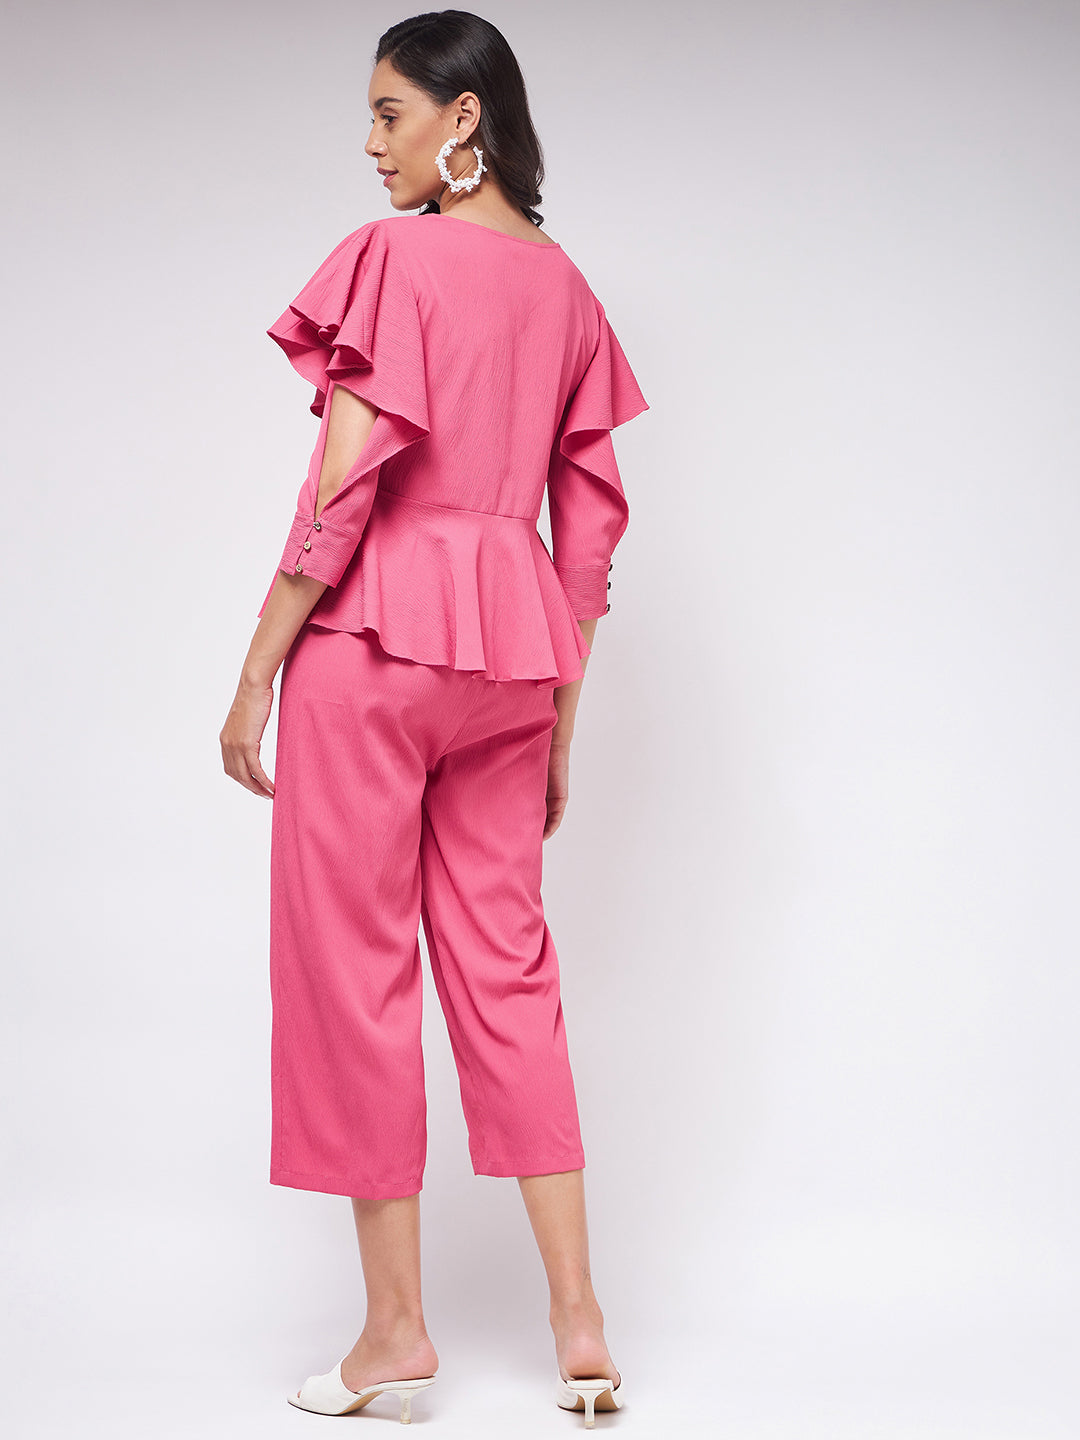 Flaunt Yourself In Solid Overlap Top With Stylish Sleeves And Matching Pants Set